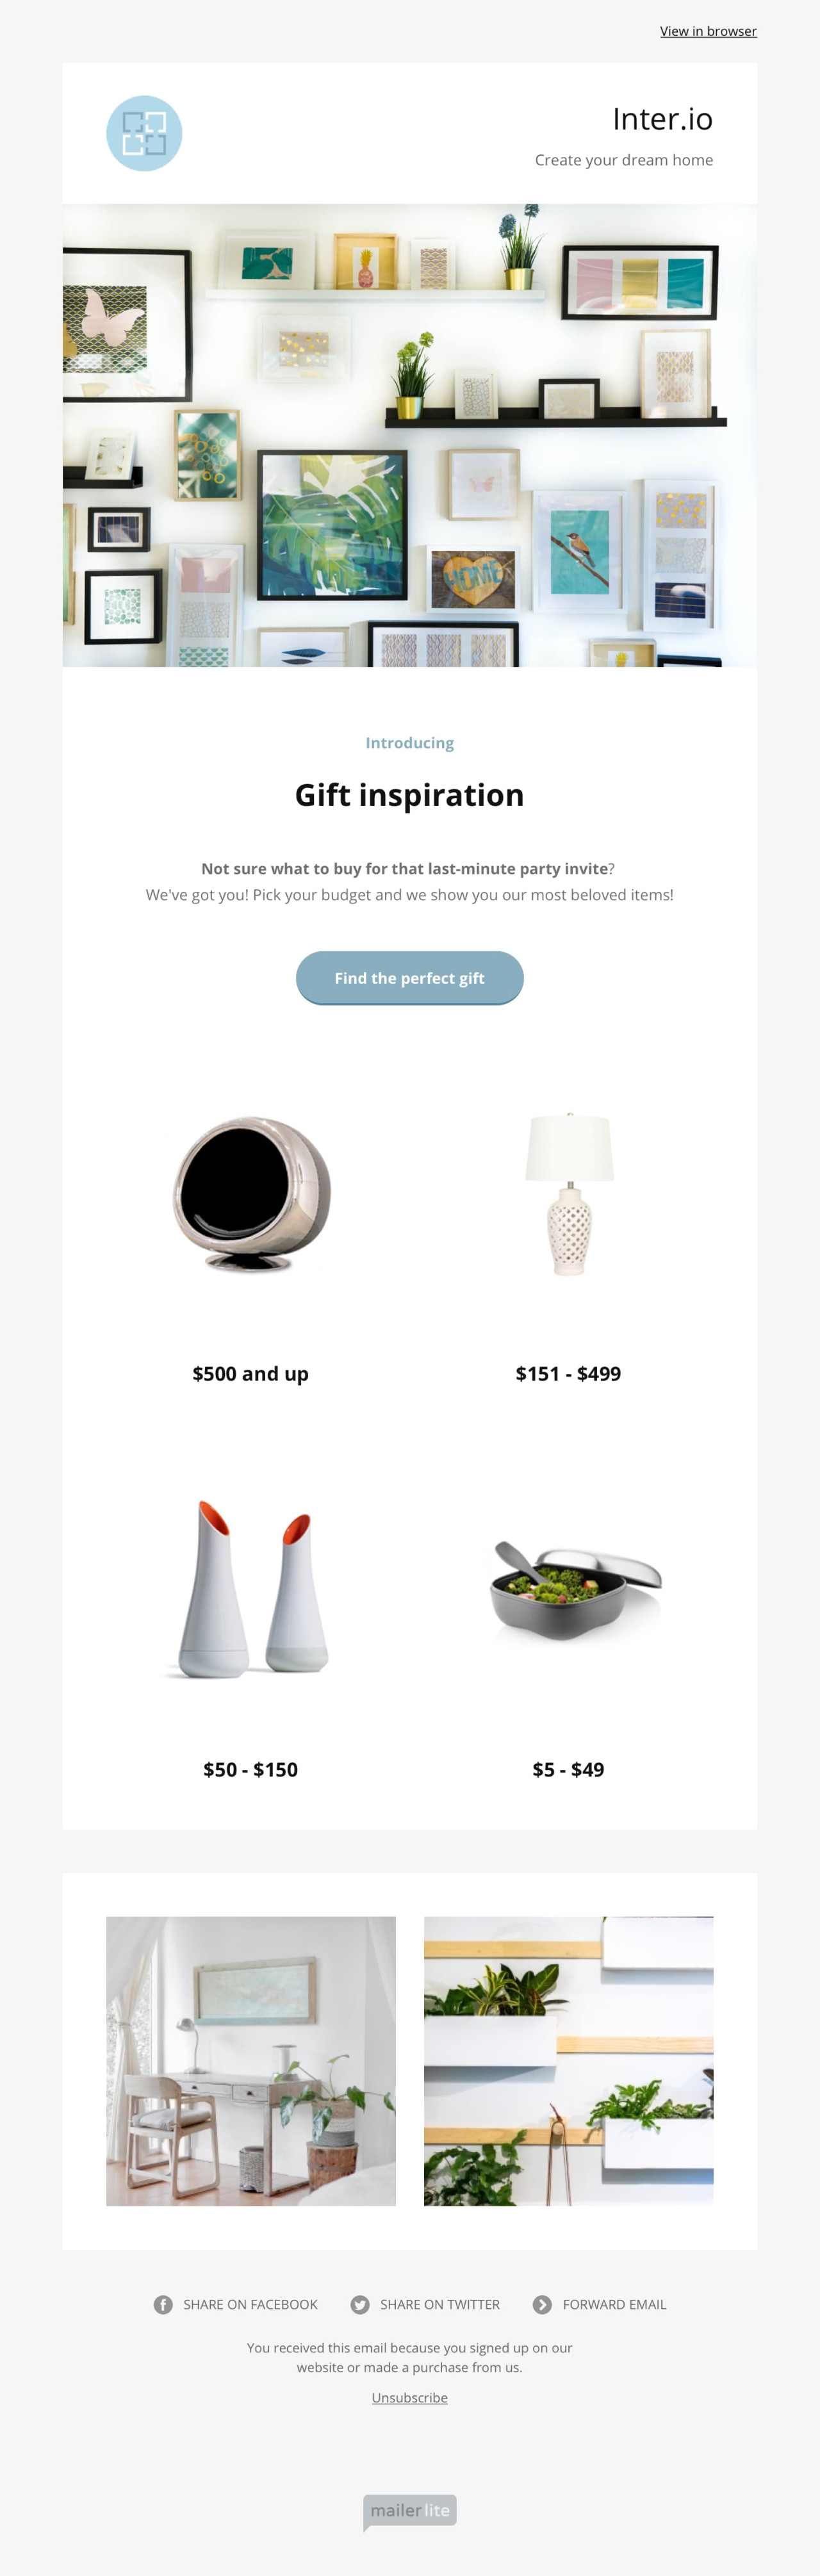 Home products gift ideas template - Made by MailerLite